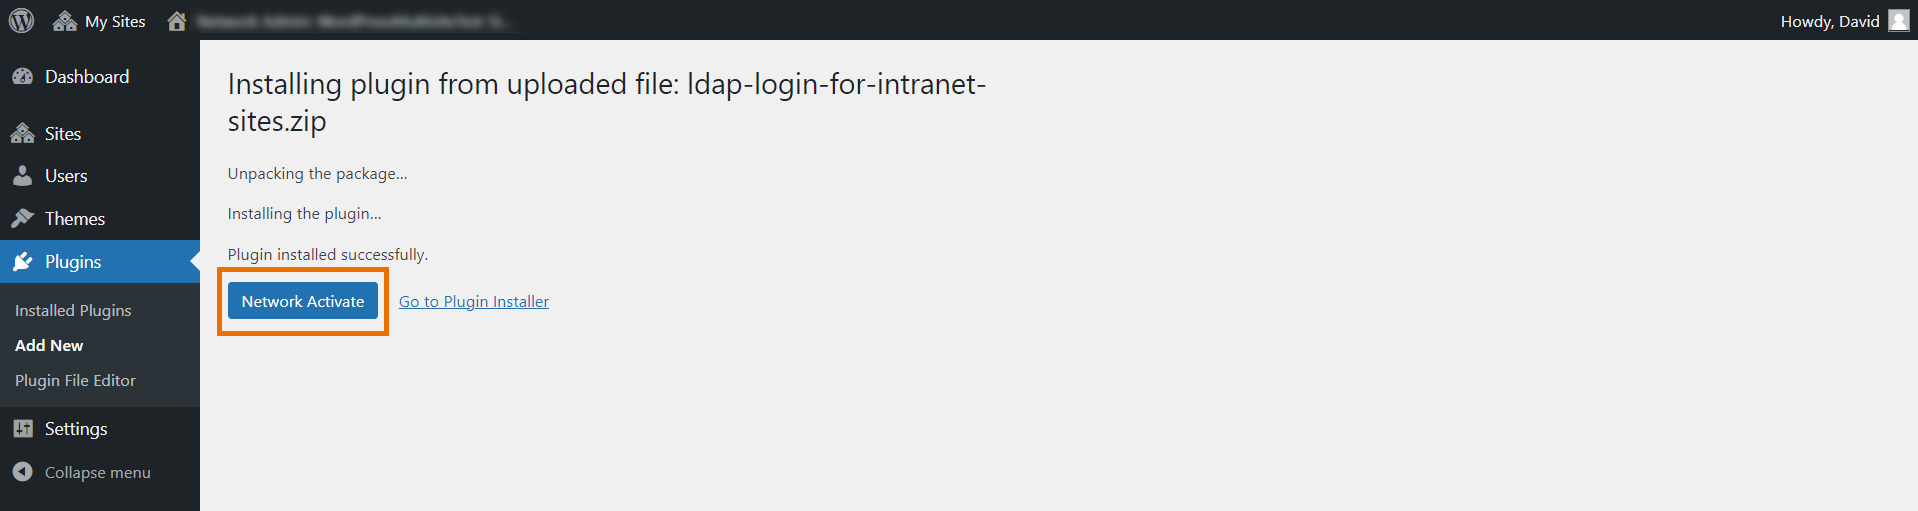 Activate the LDAP/Active Directory login for Intranet Sites multisite plugin